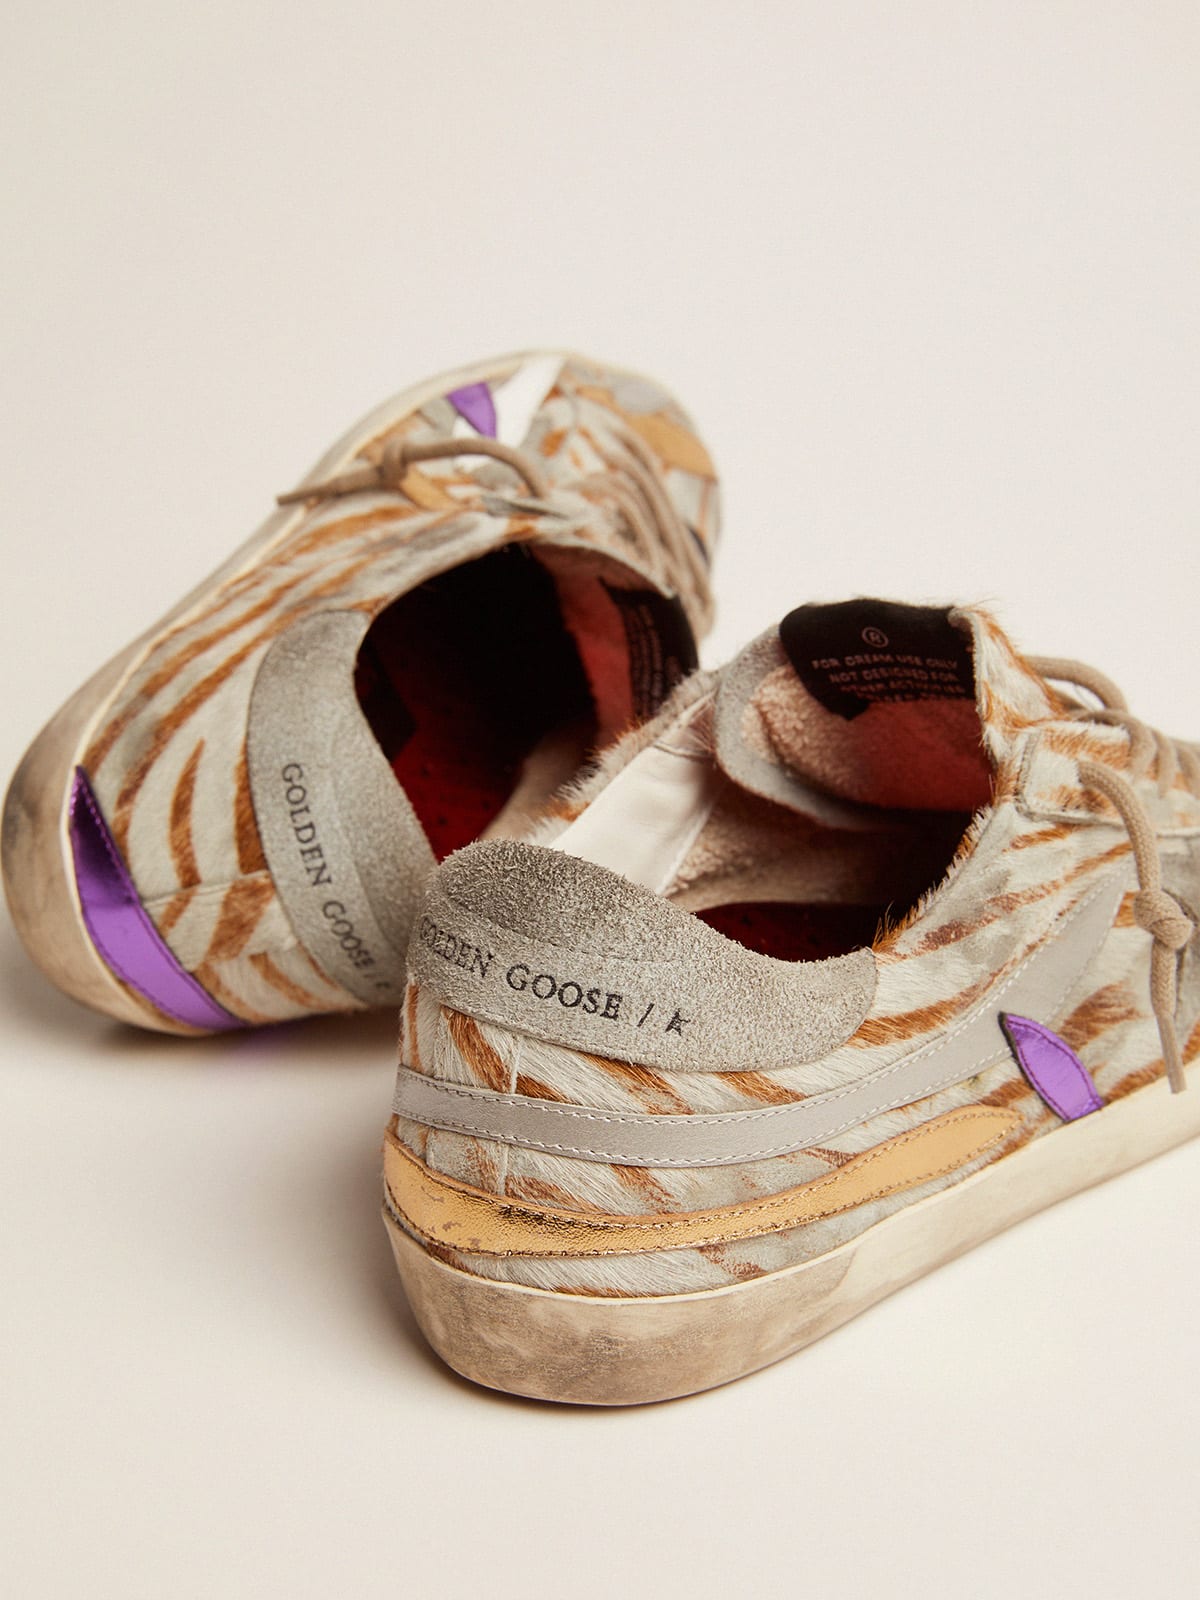 Golden Goose - Super-Star sneakers in zebra-print pony skin with colored laminated leather petals in 